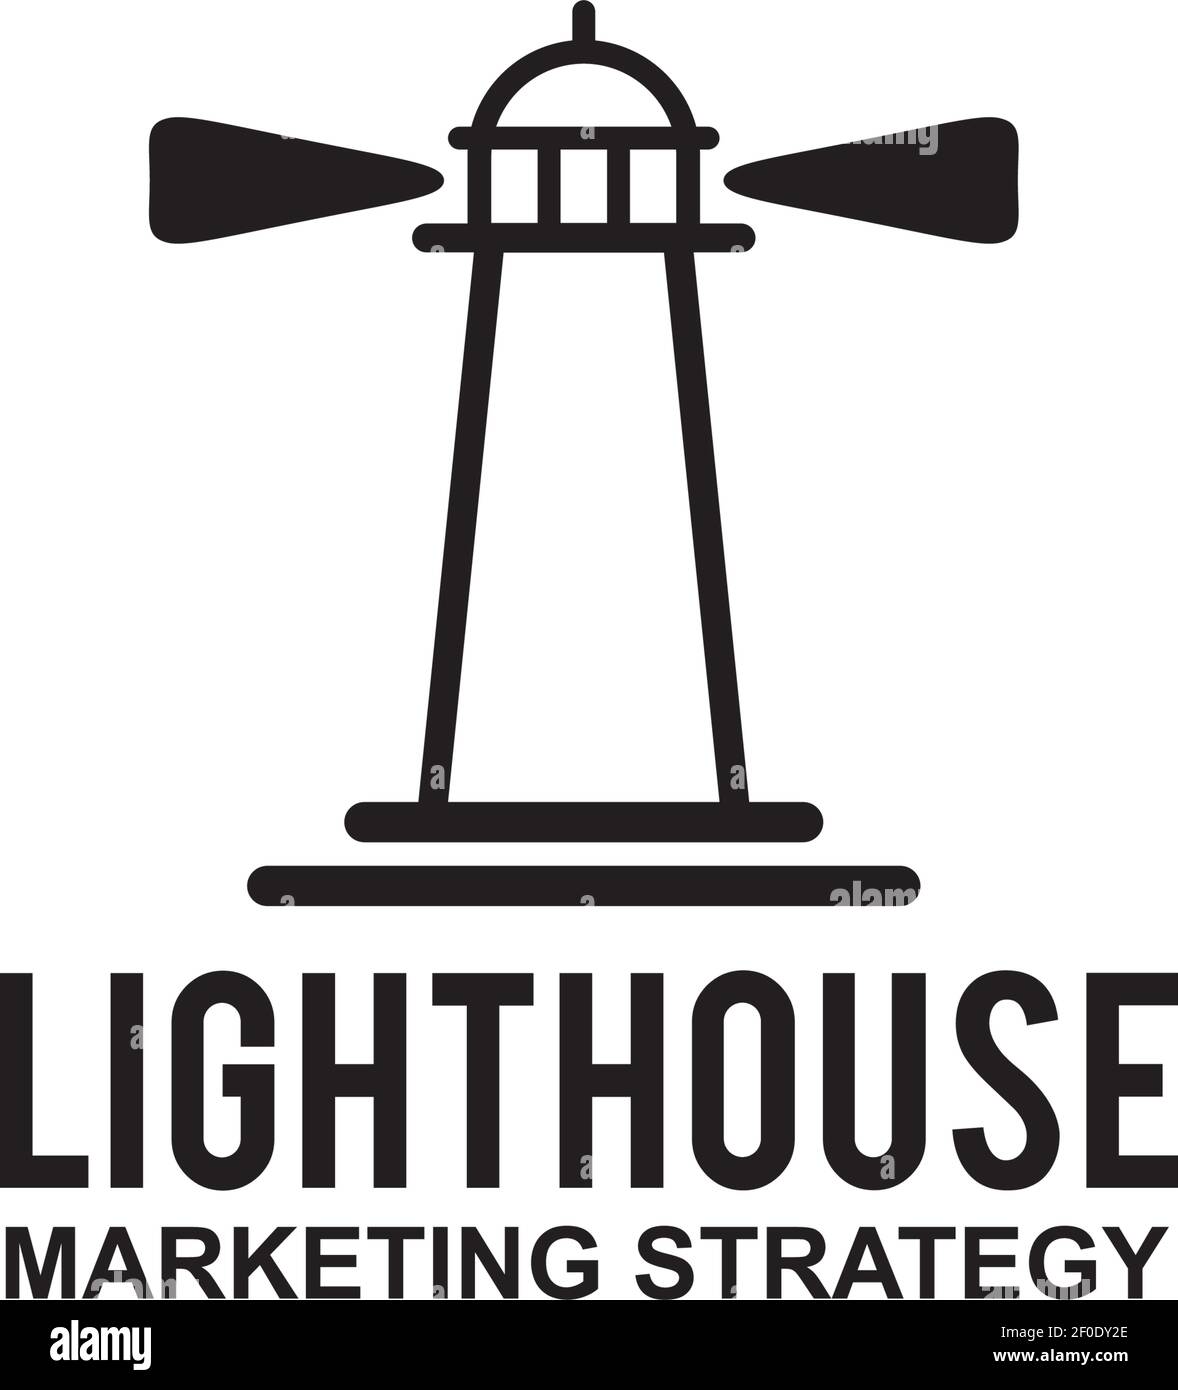 Light house icon for marketing management company logo design template Stock Vector